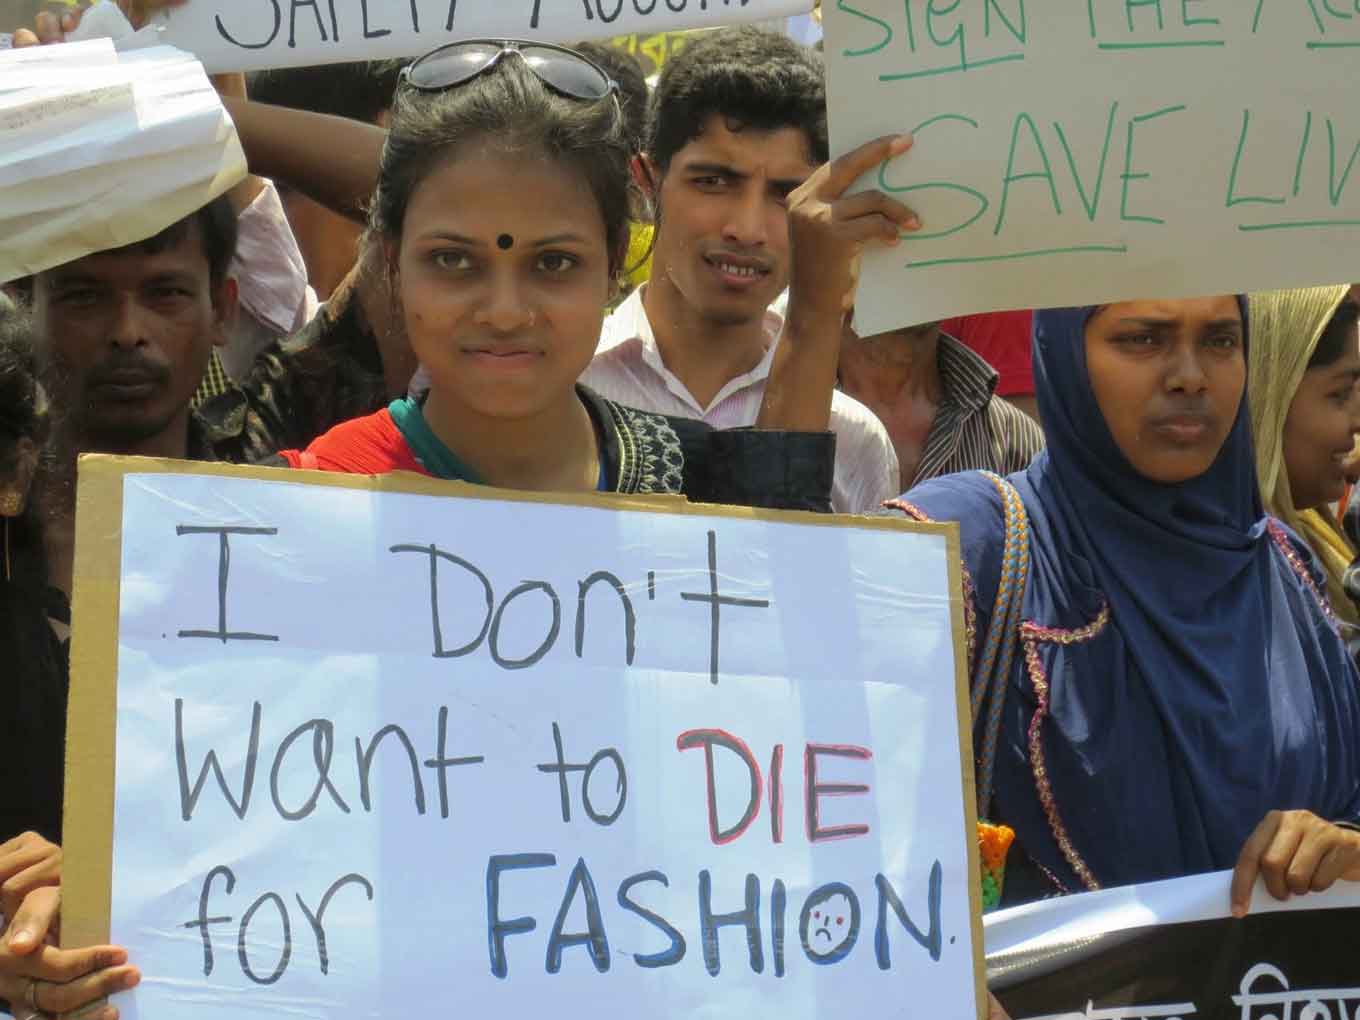 A woman in Bangladesh stands in a crowd holding a sign that says, "I don't want to DIE for FASHION"